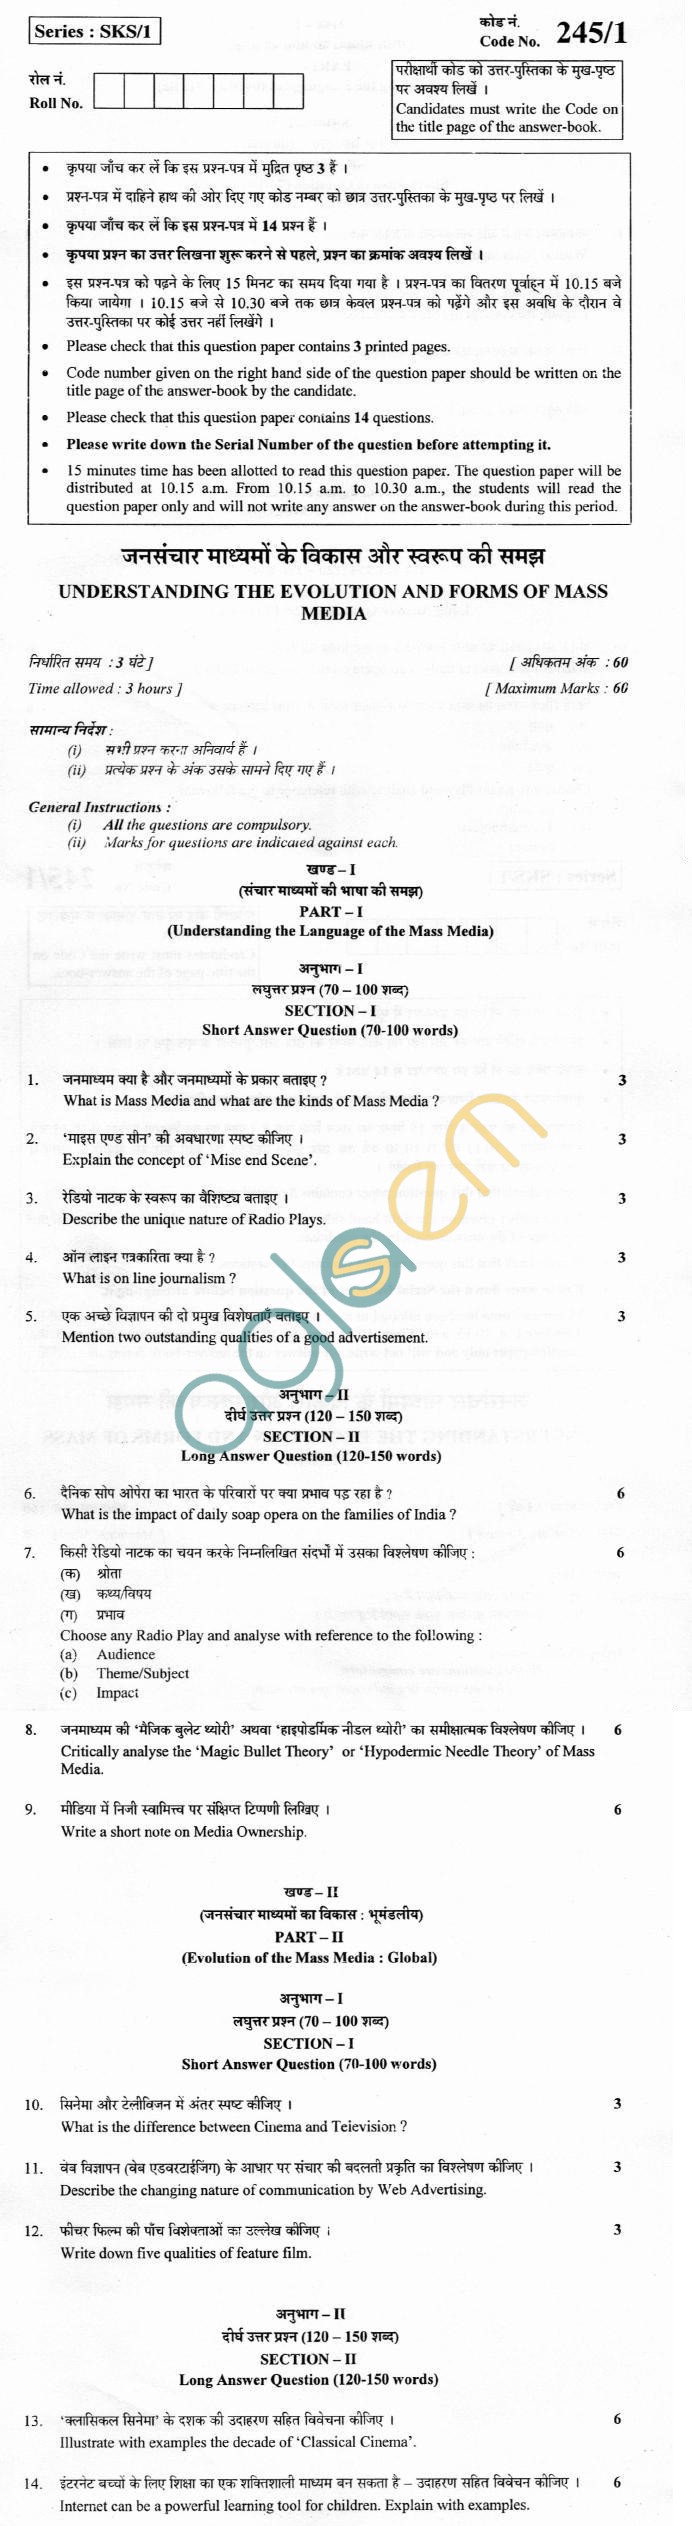 CBSE Board Exam 2013 Class XII Question Paper - Understanding The Evolution And Forms of Mass Media